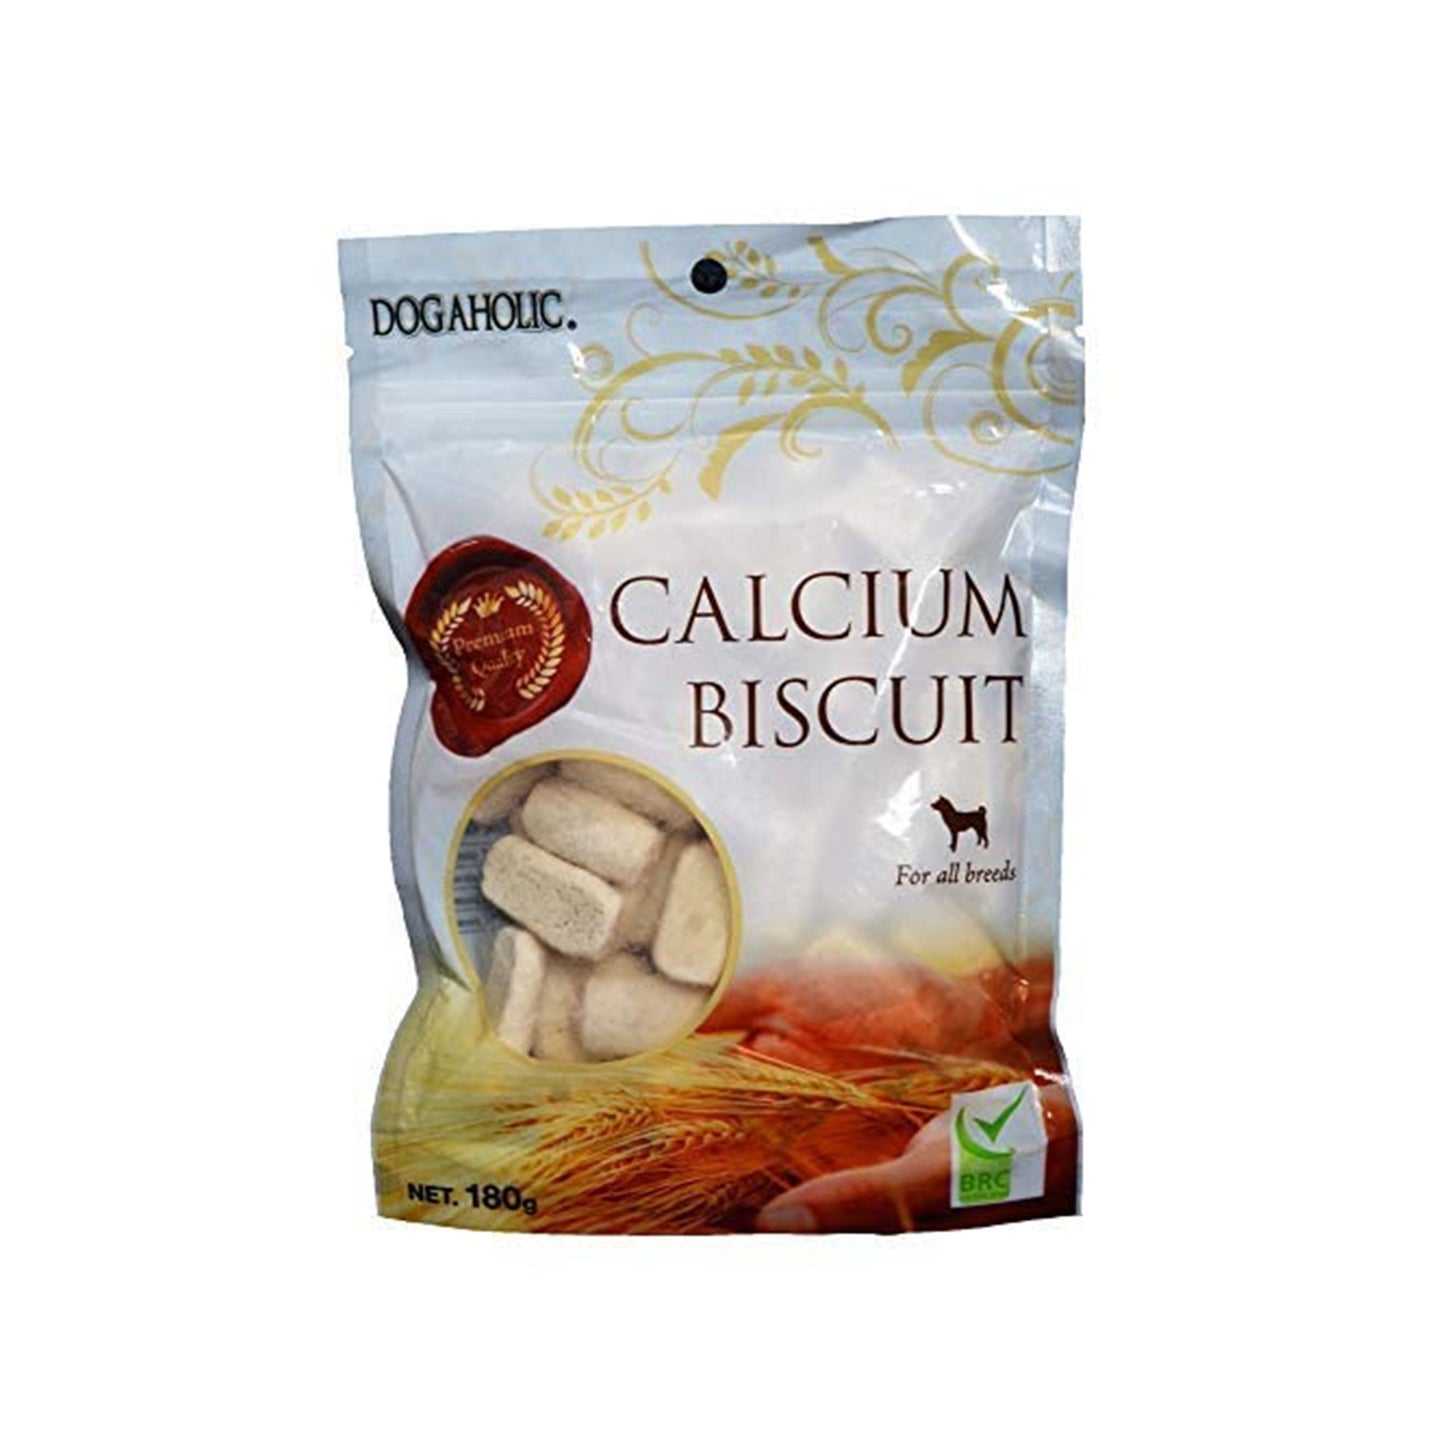 Dogaholic - Calcium Biscuit For All Breeds